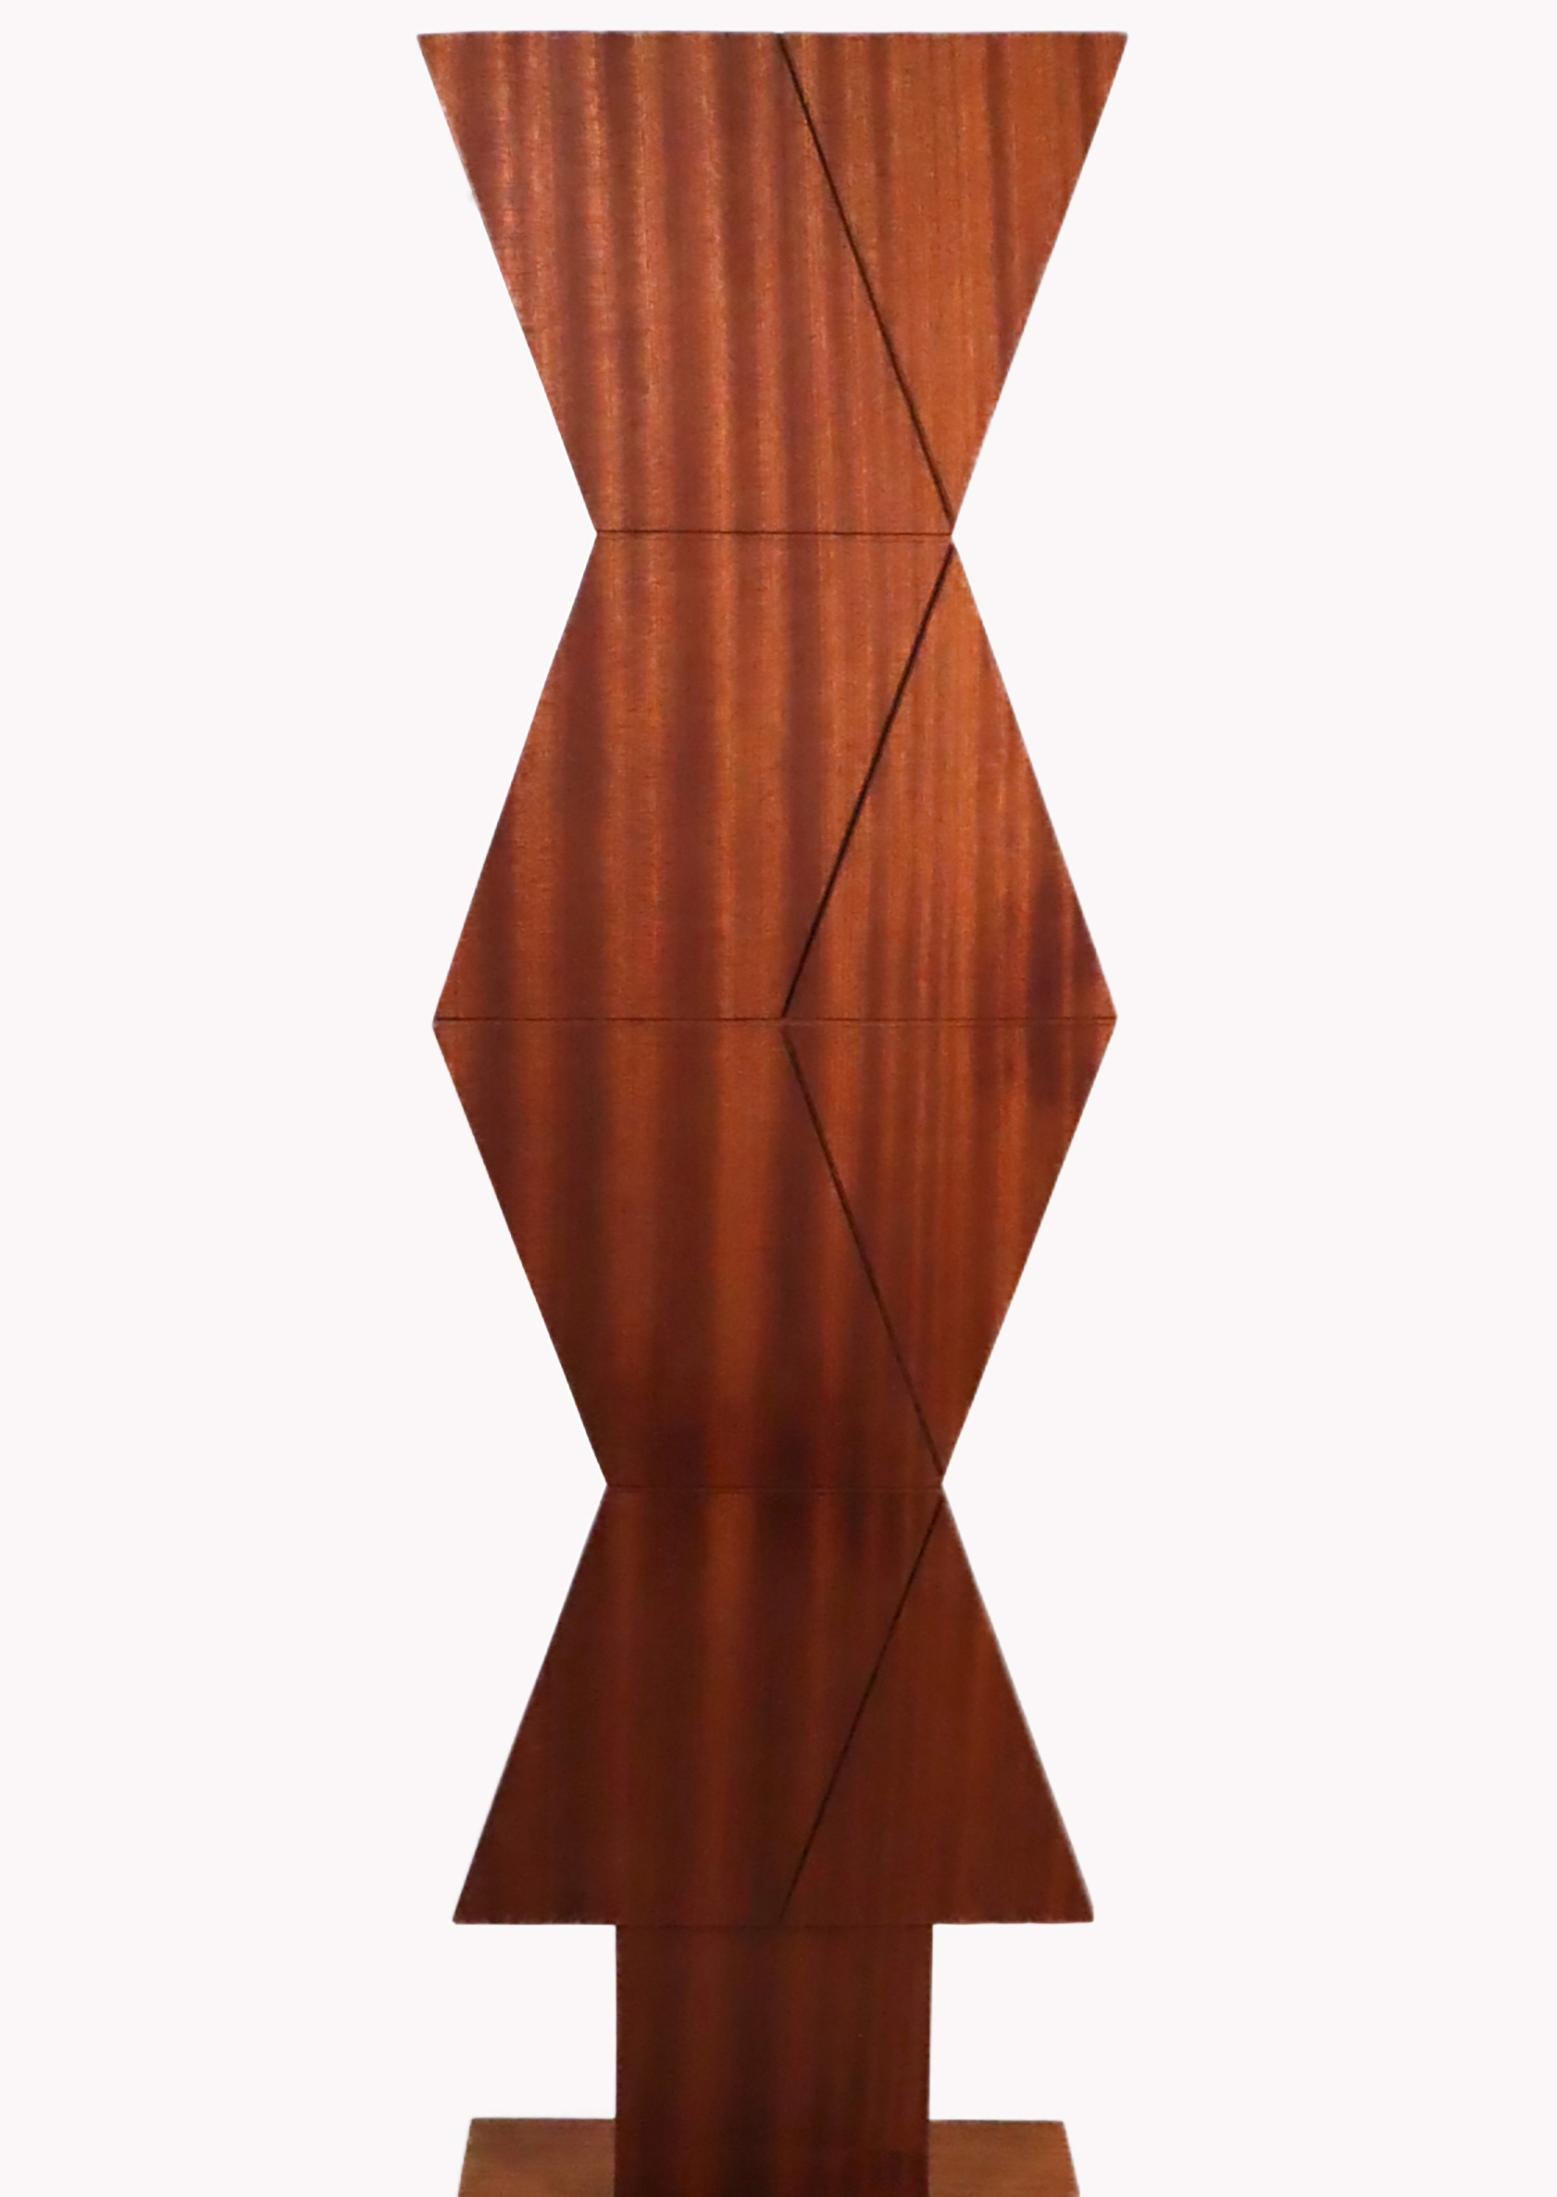 John Haley Abstract Sculpture - Wood Sculpture 1971 abstract geometric illusion INVENTORY CLEARANCE SALE